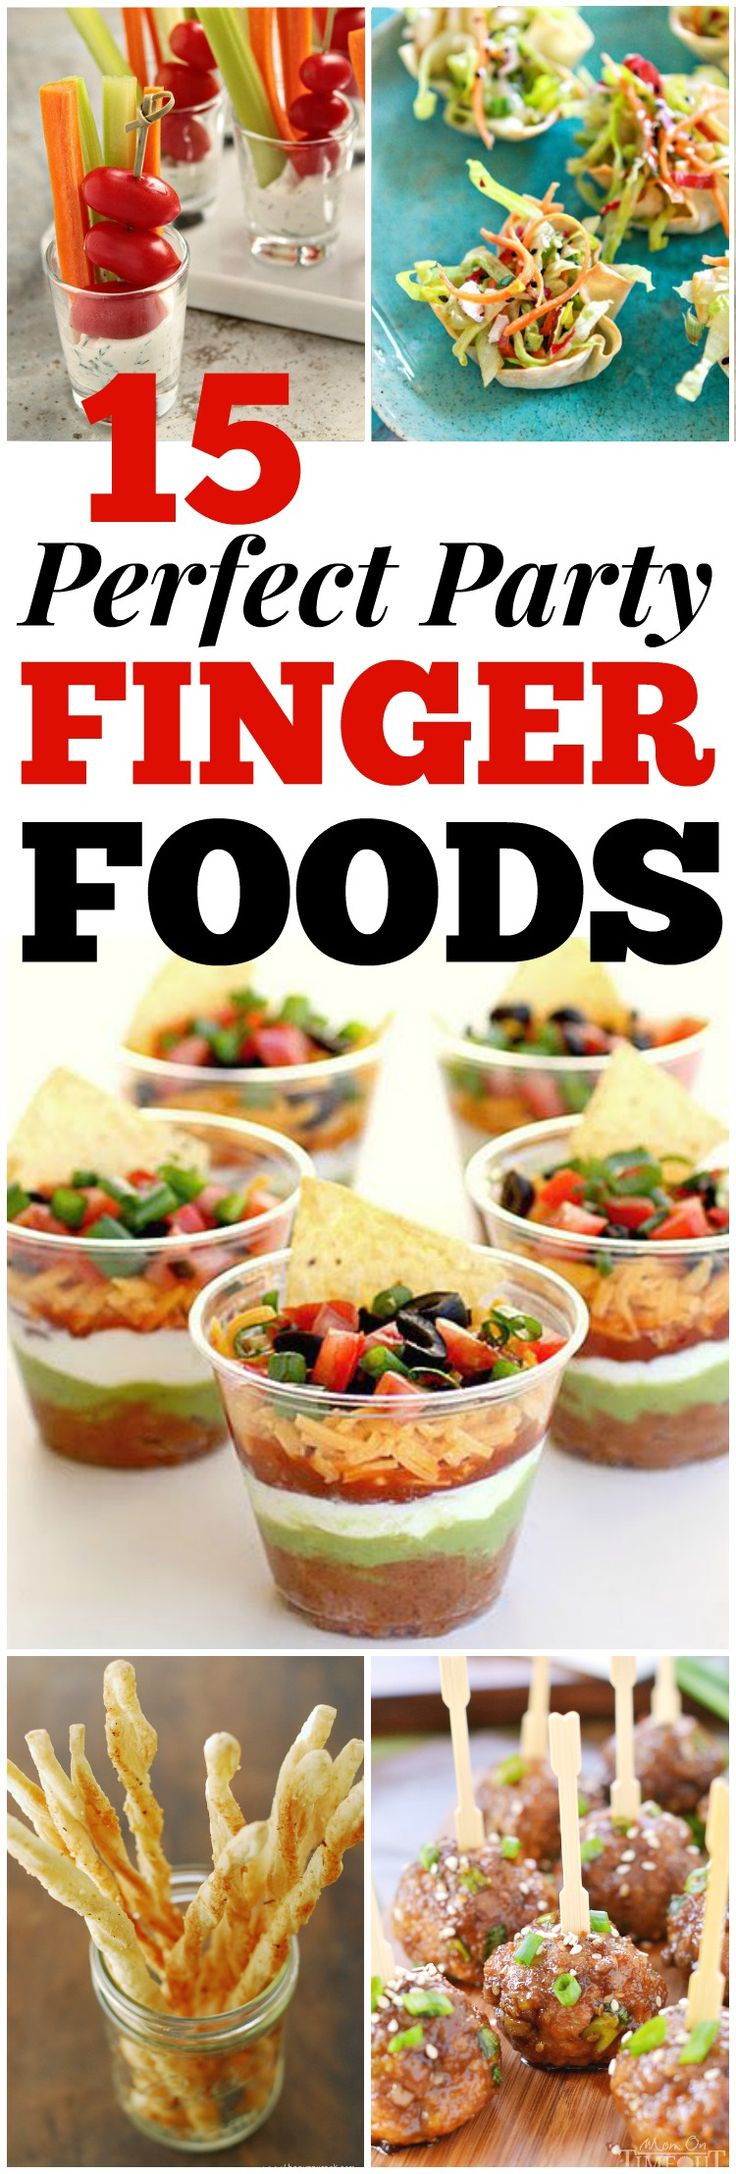 Finger Food Ideas For Summer Party
 Top 25 best Party finger foods ideas on Pinterest